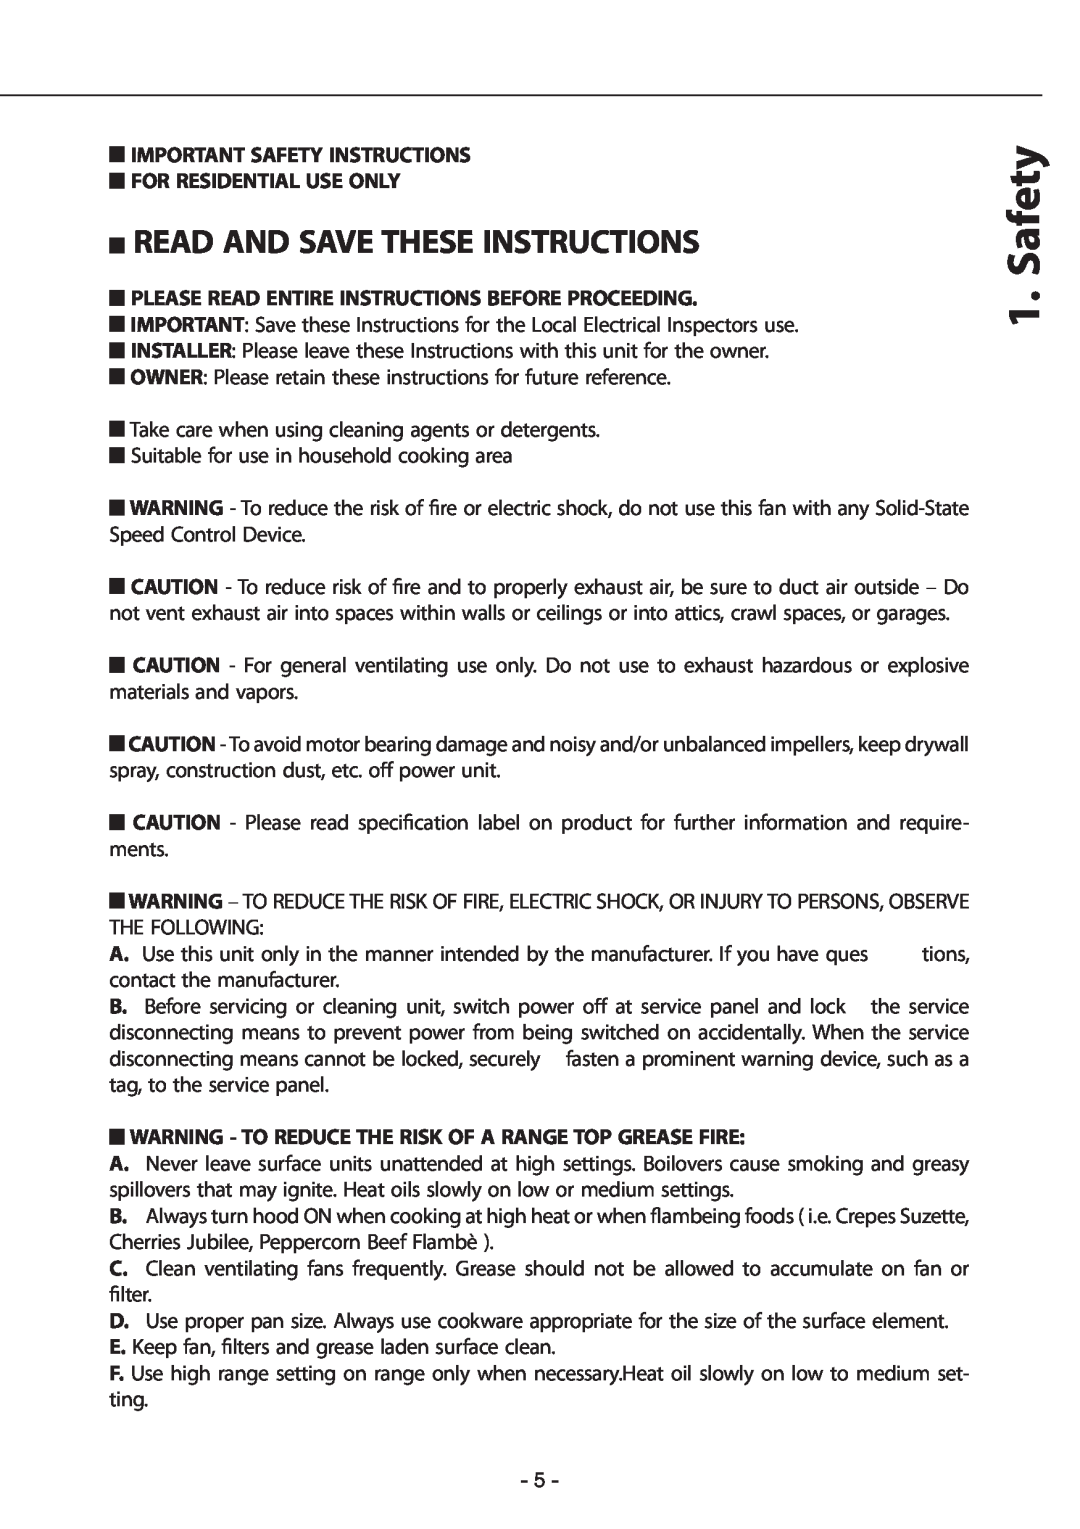 Zephyr GU4/MR11, GU5/MR16 Read And Save These Instructions, Important Safety Instructions, For Residential Use Only 